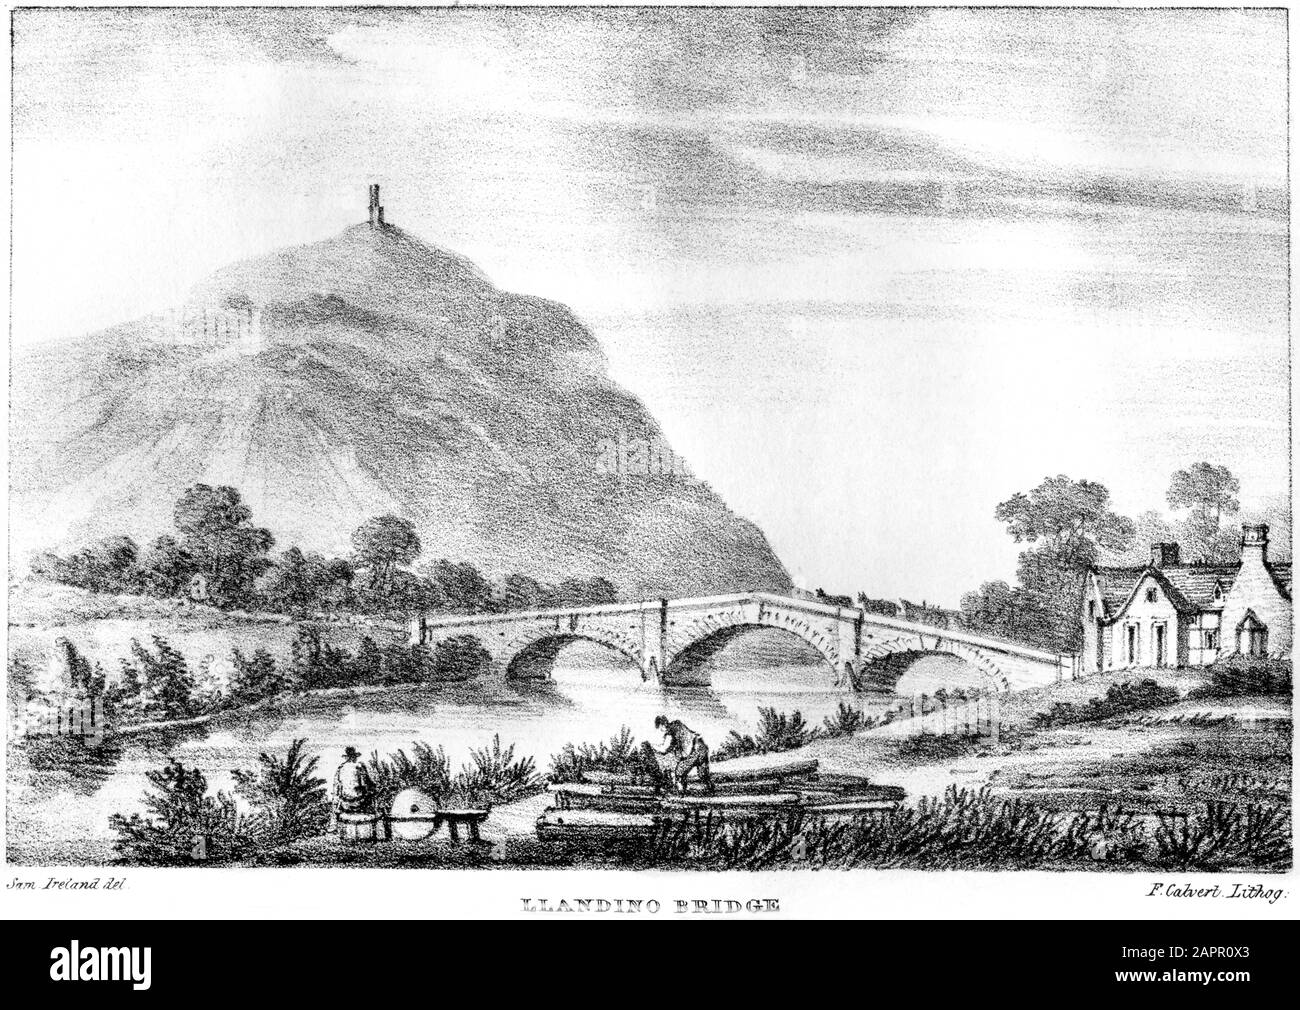 A lithograph of Llandino (Llandrinio) Bridge scanned at high resolution. from a book printed in 1824.  Believed copyright free. Stock Photo